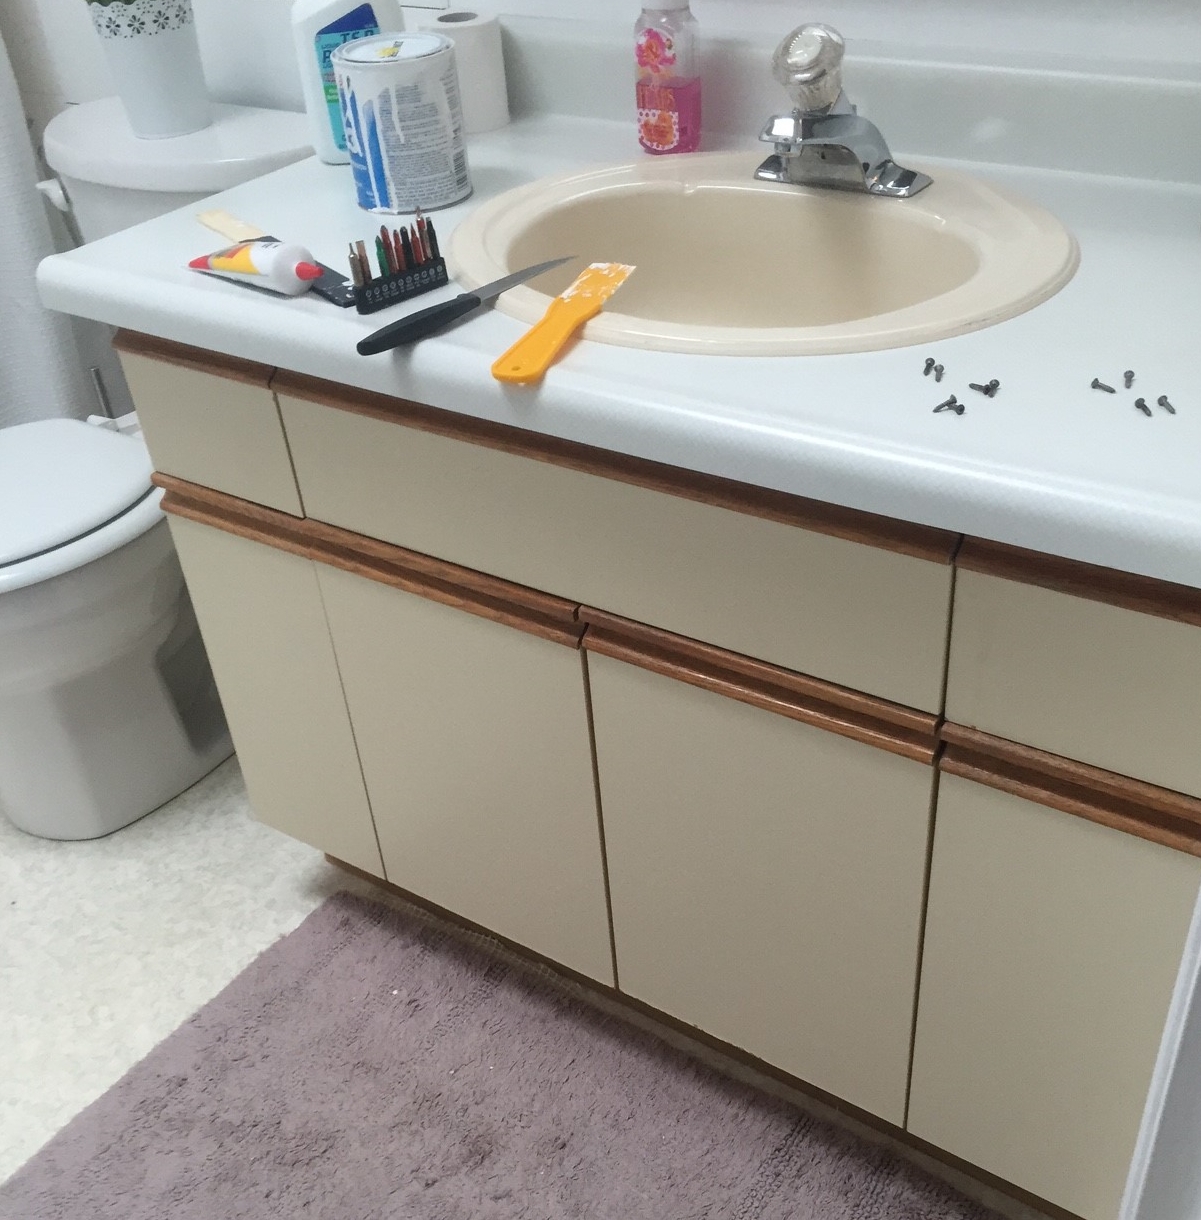 Bathroom Update How To Paint Laminate Cabinets The Penny Drawer,Super Scary Diy Halloween Decorations Outdoor Scary